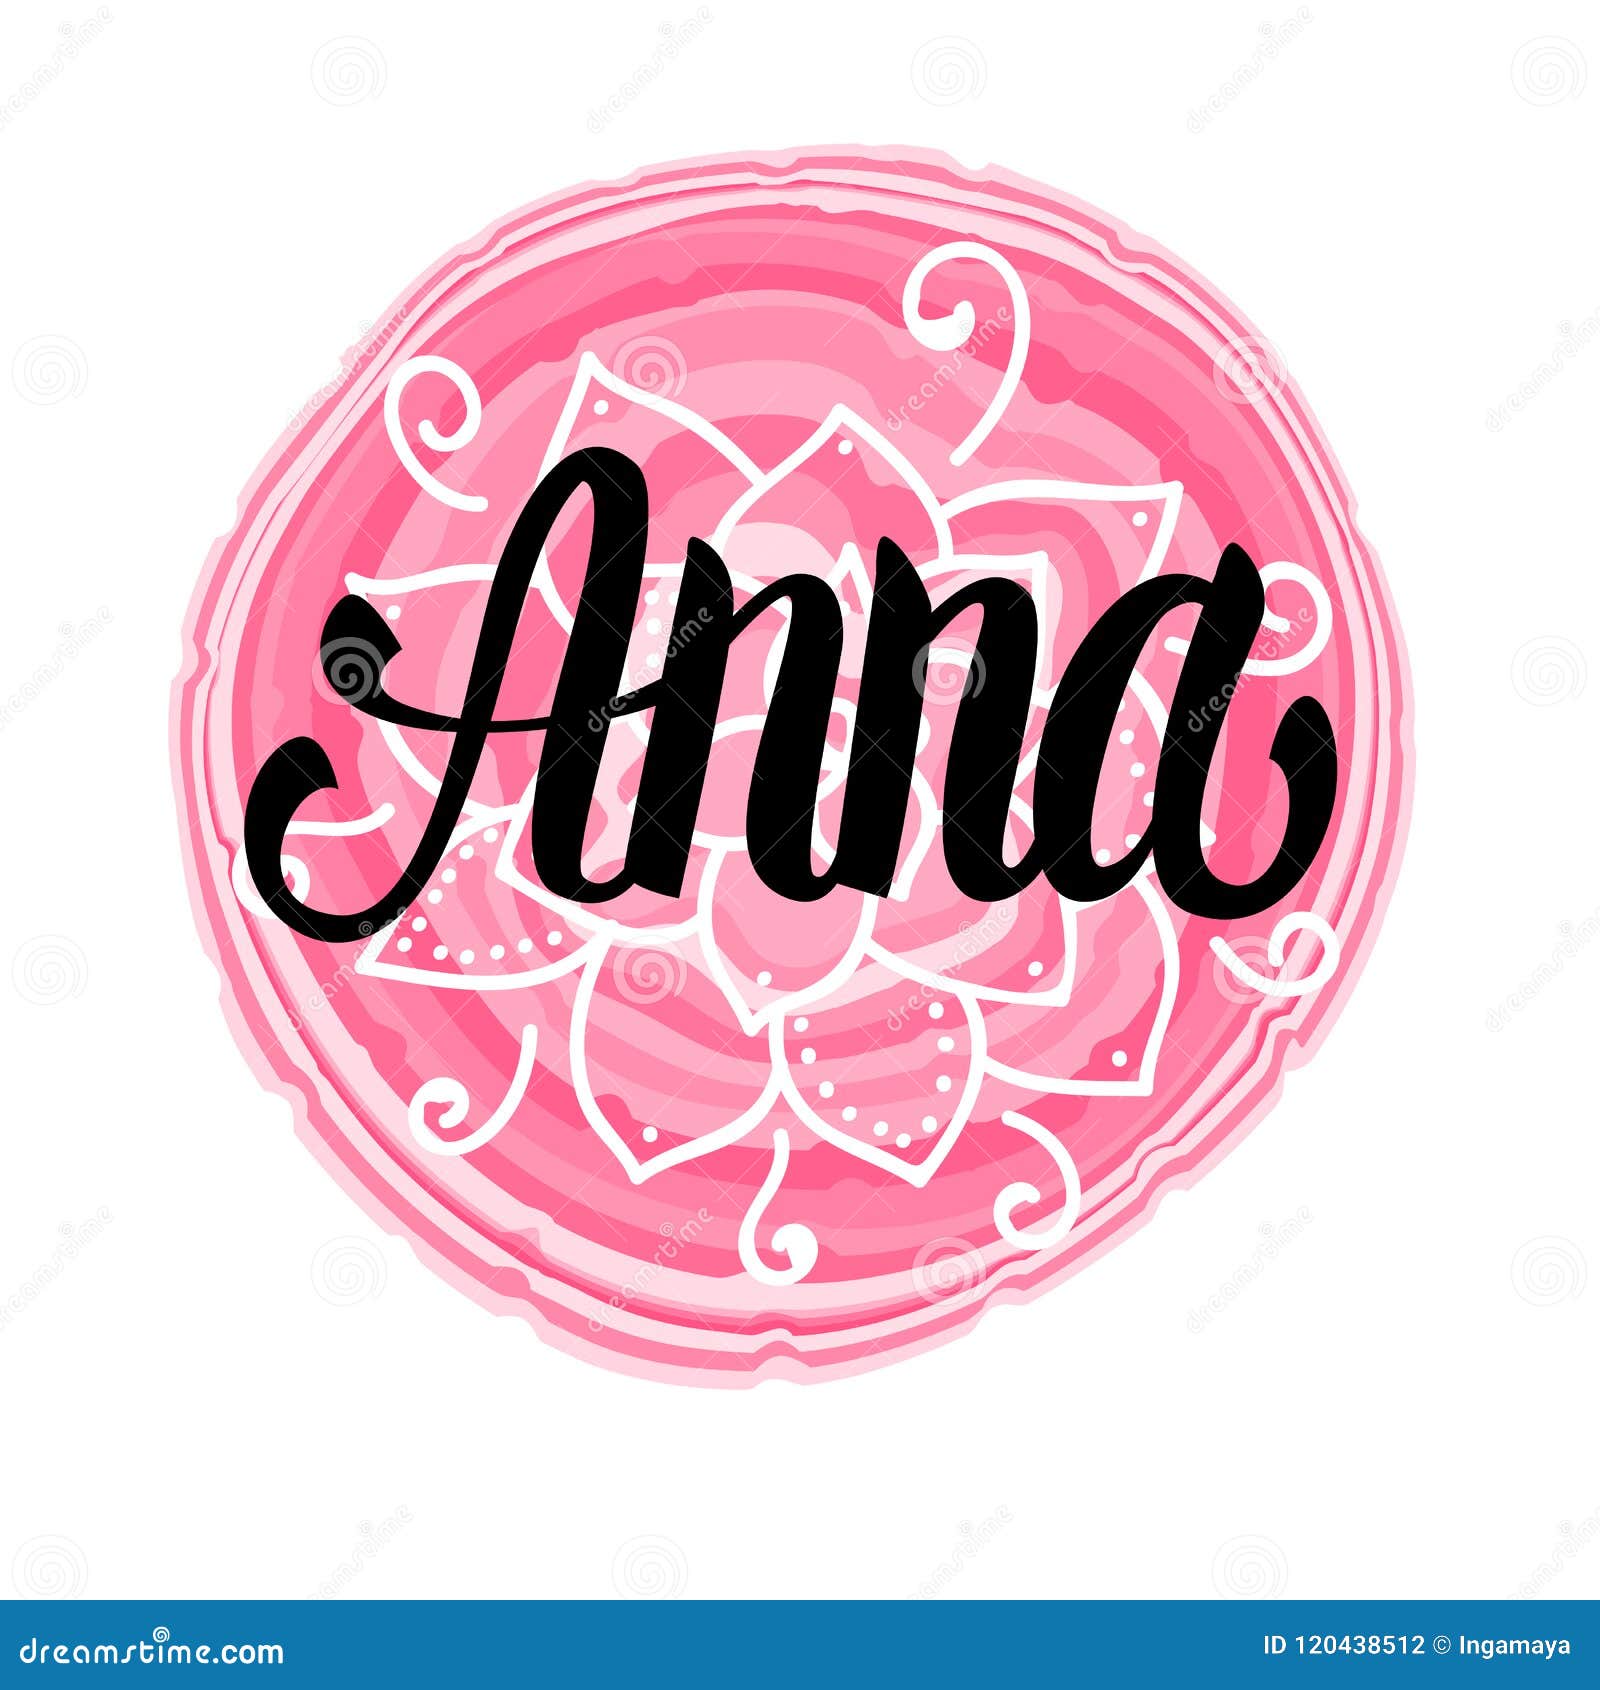 Anna Name Stock Illustrations 70 Anna Name Stock Illustrations Vectors Clipart Dreamstime